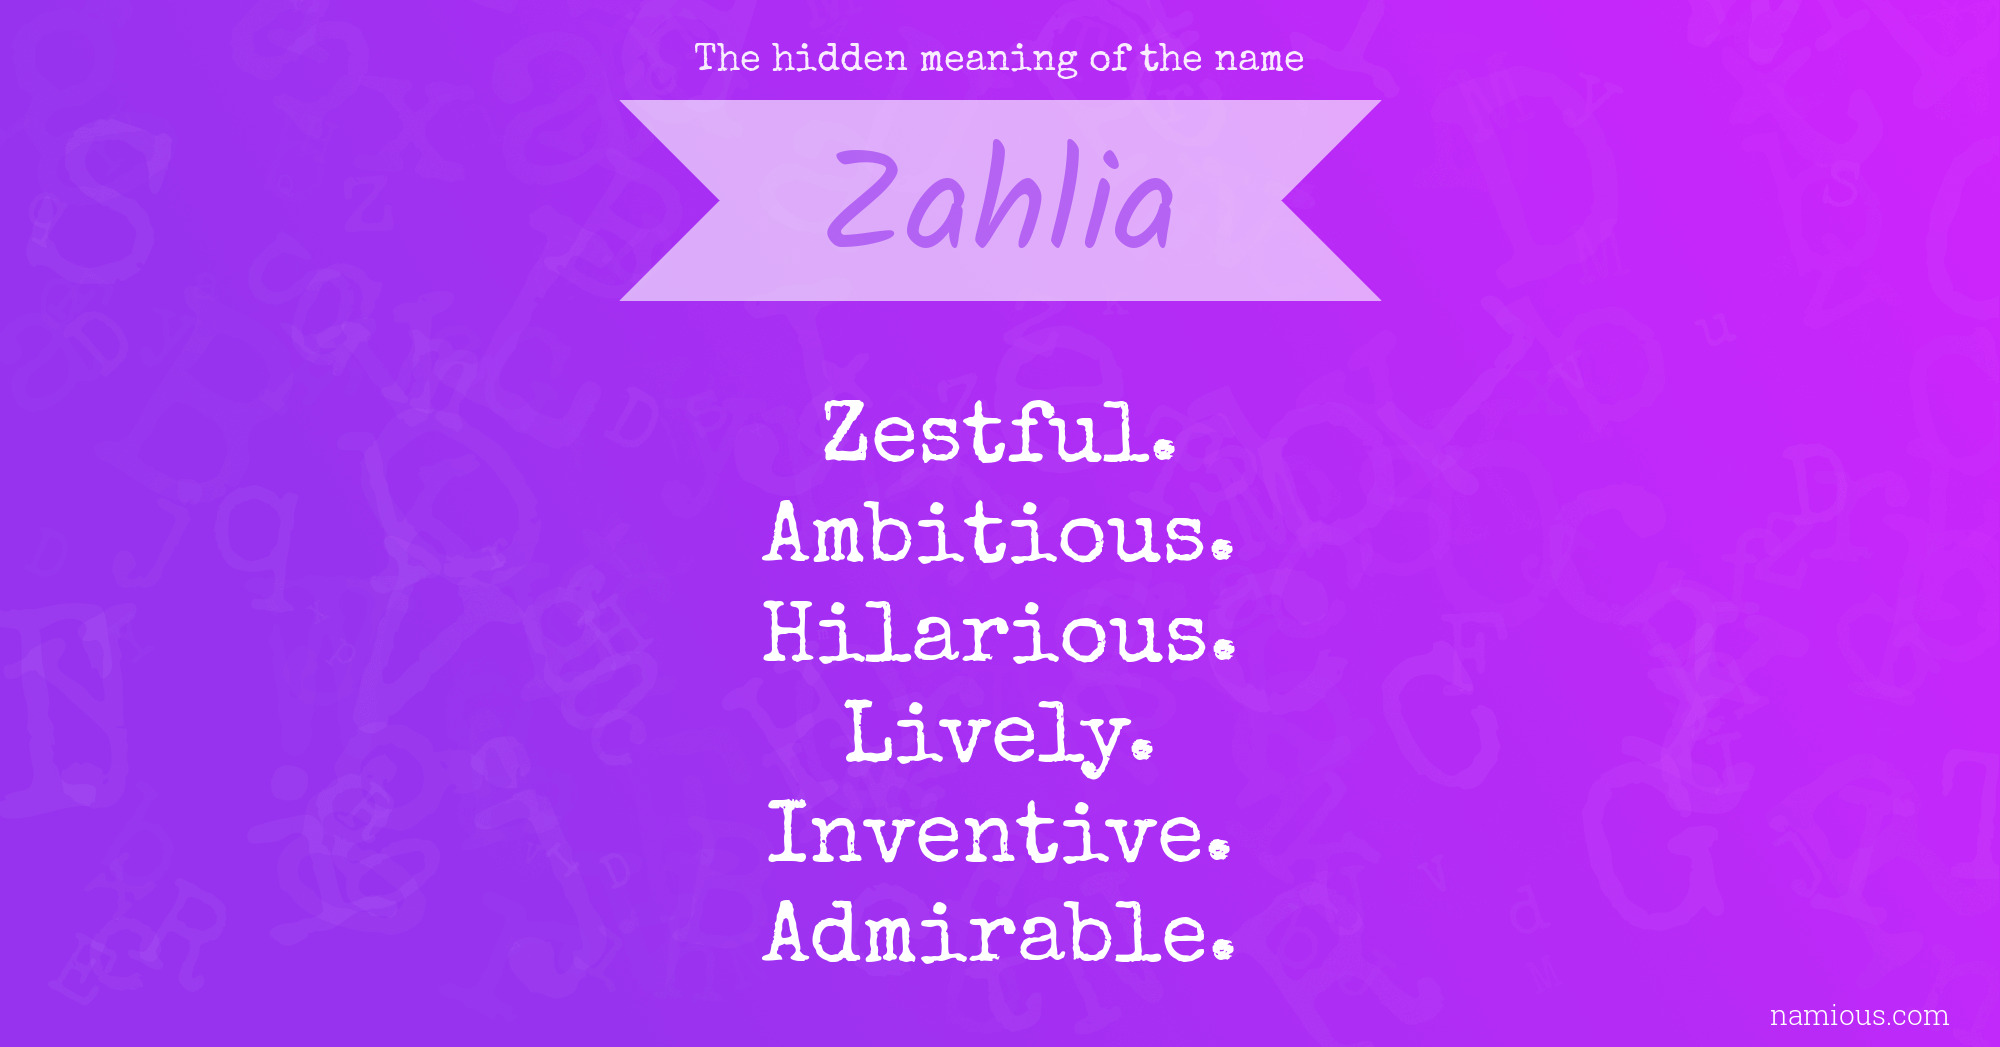 The hidden meaning of the name Zahlia